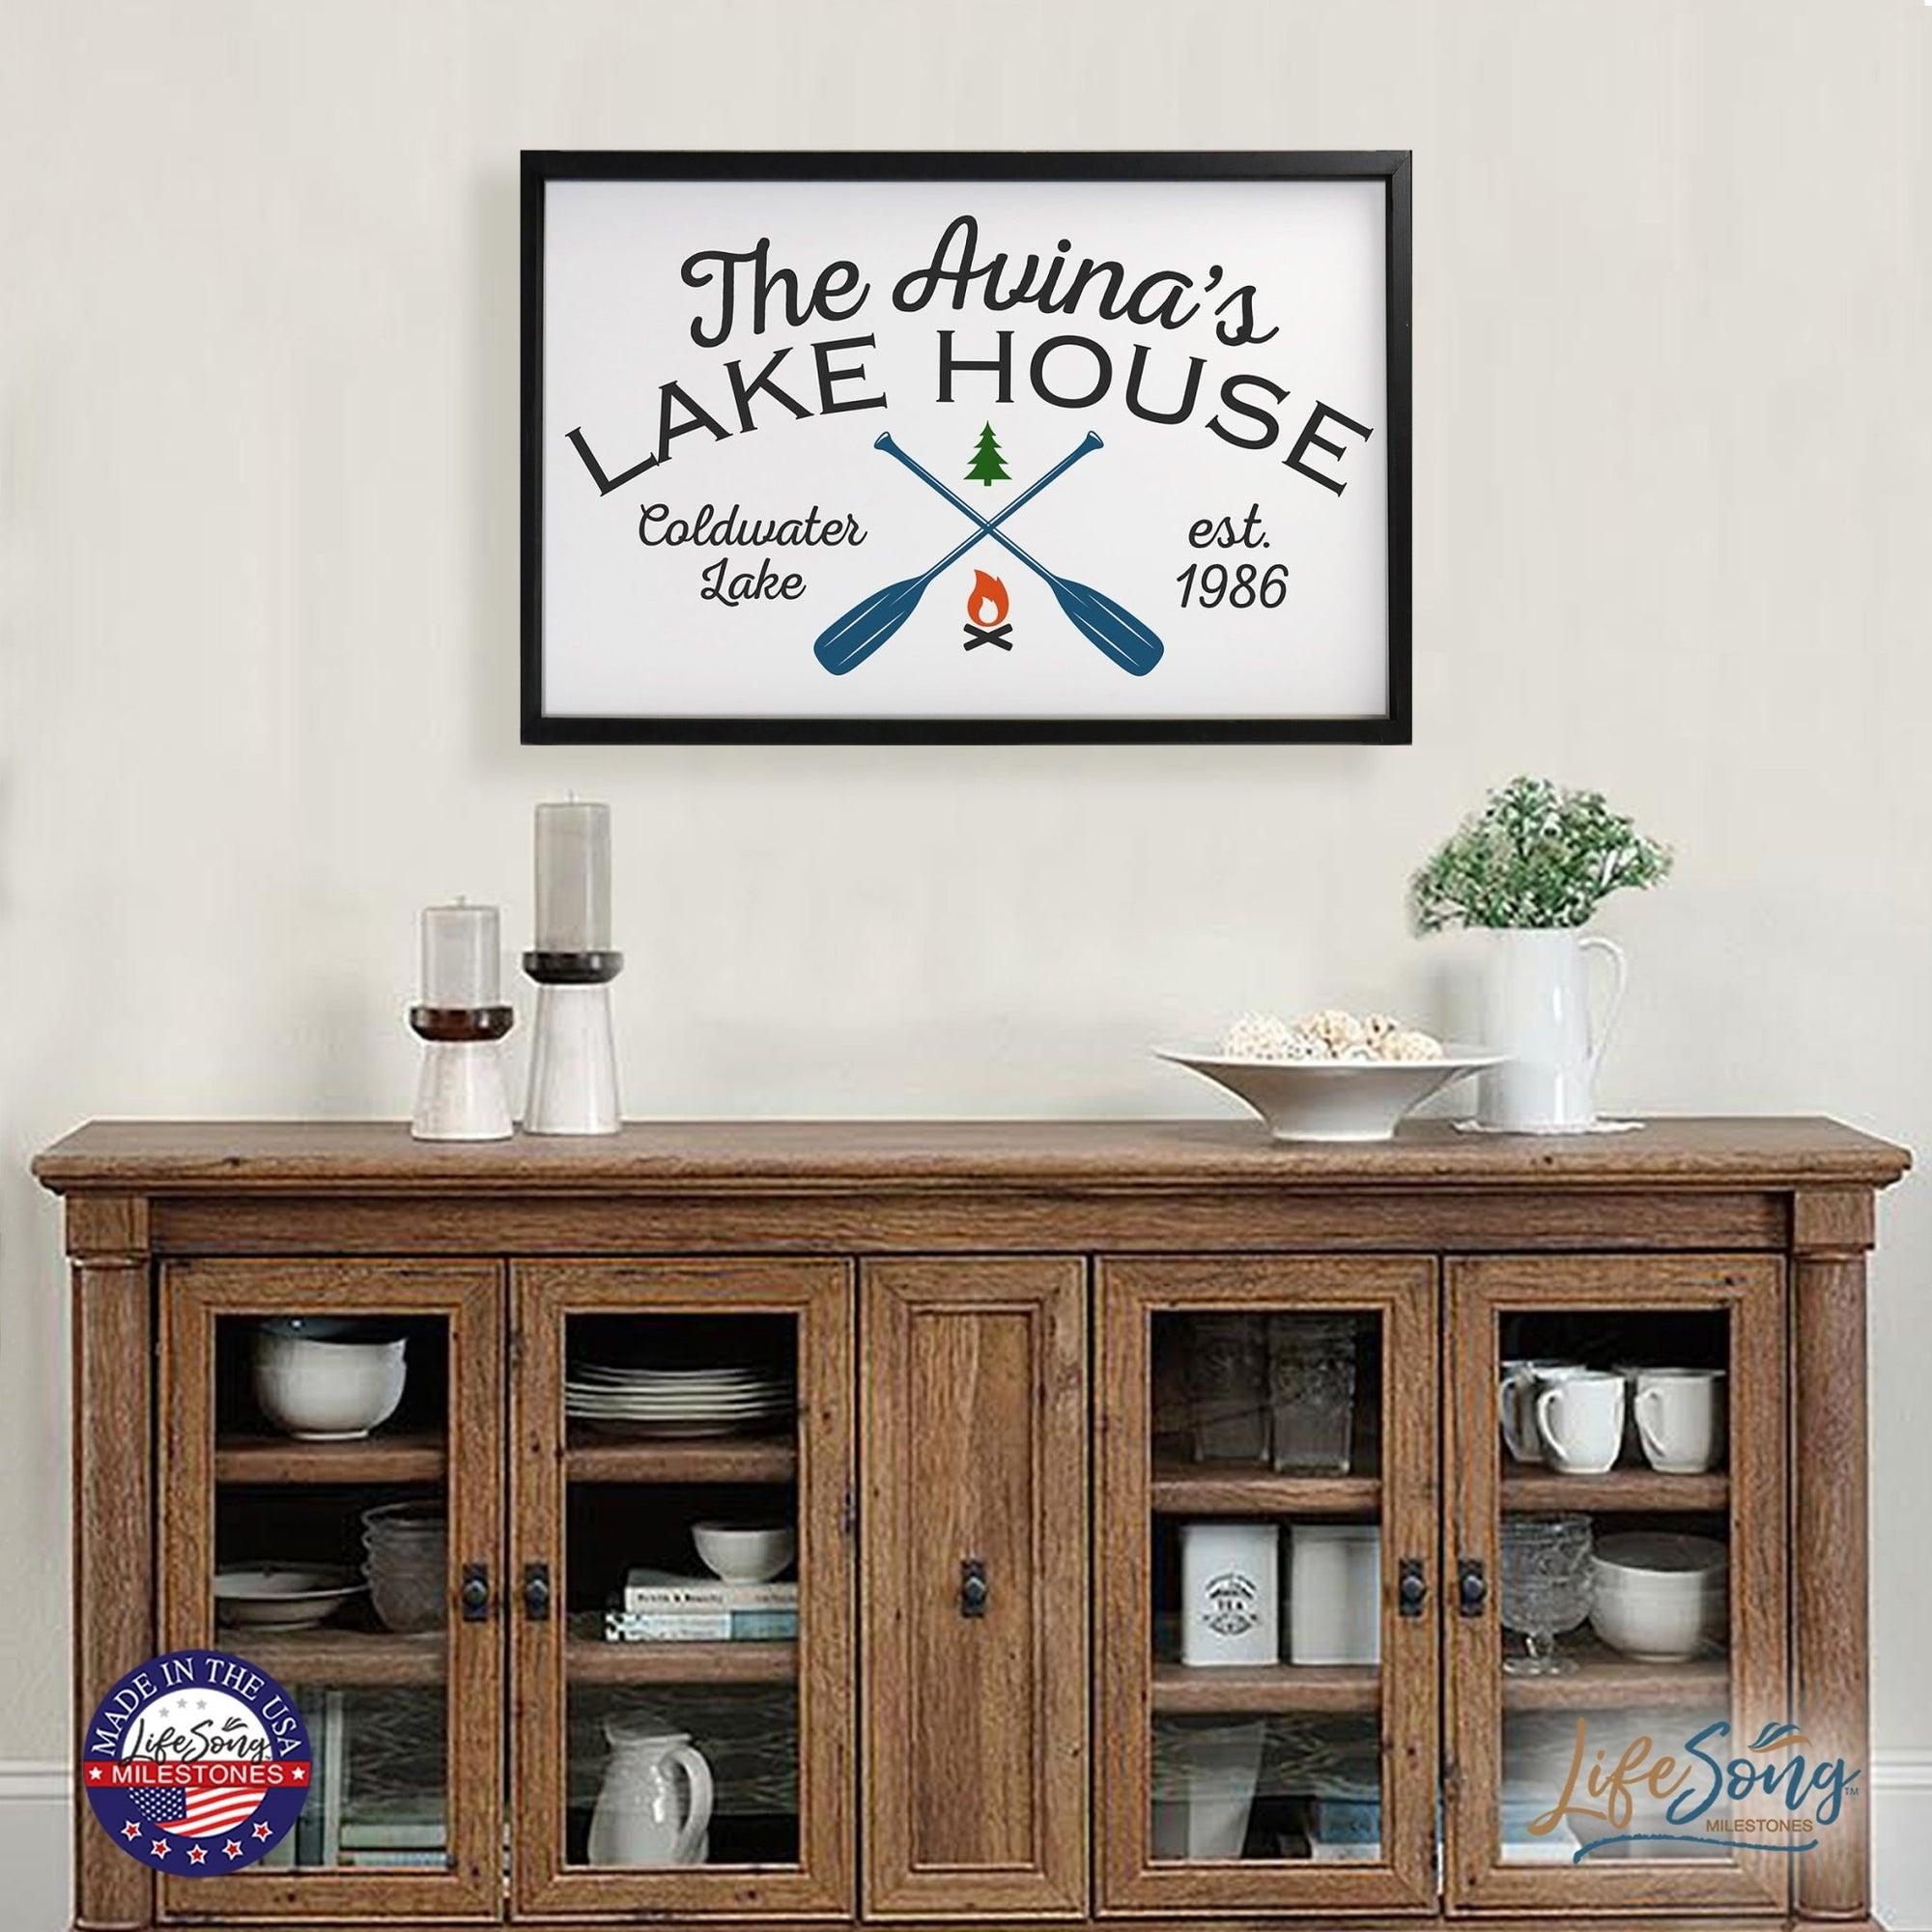 Inspirational Personalized Framed Shadow Box 25x36 - The Lake House - LifeSong Milestones